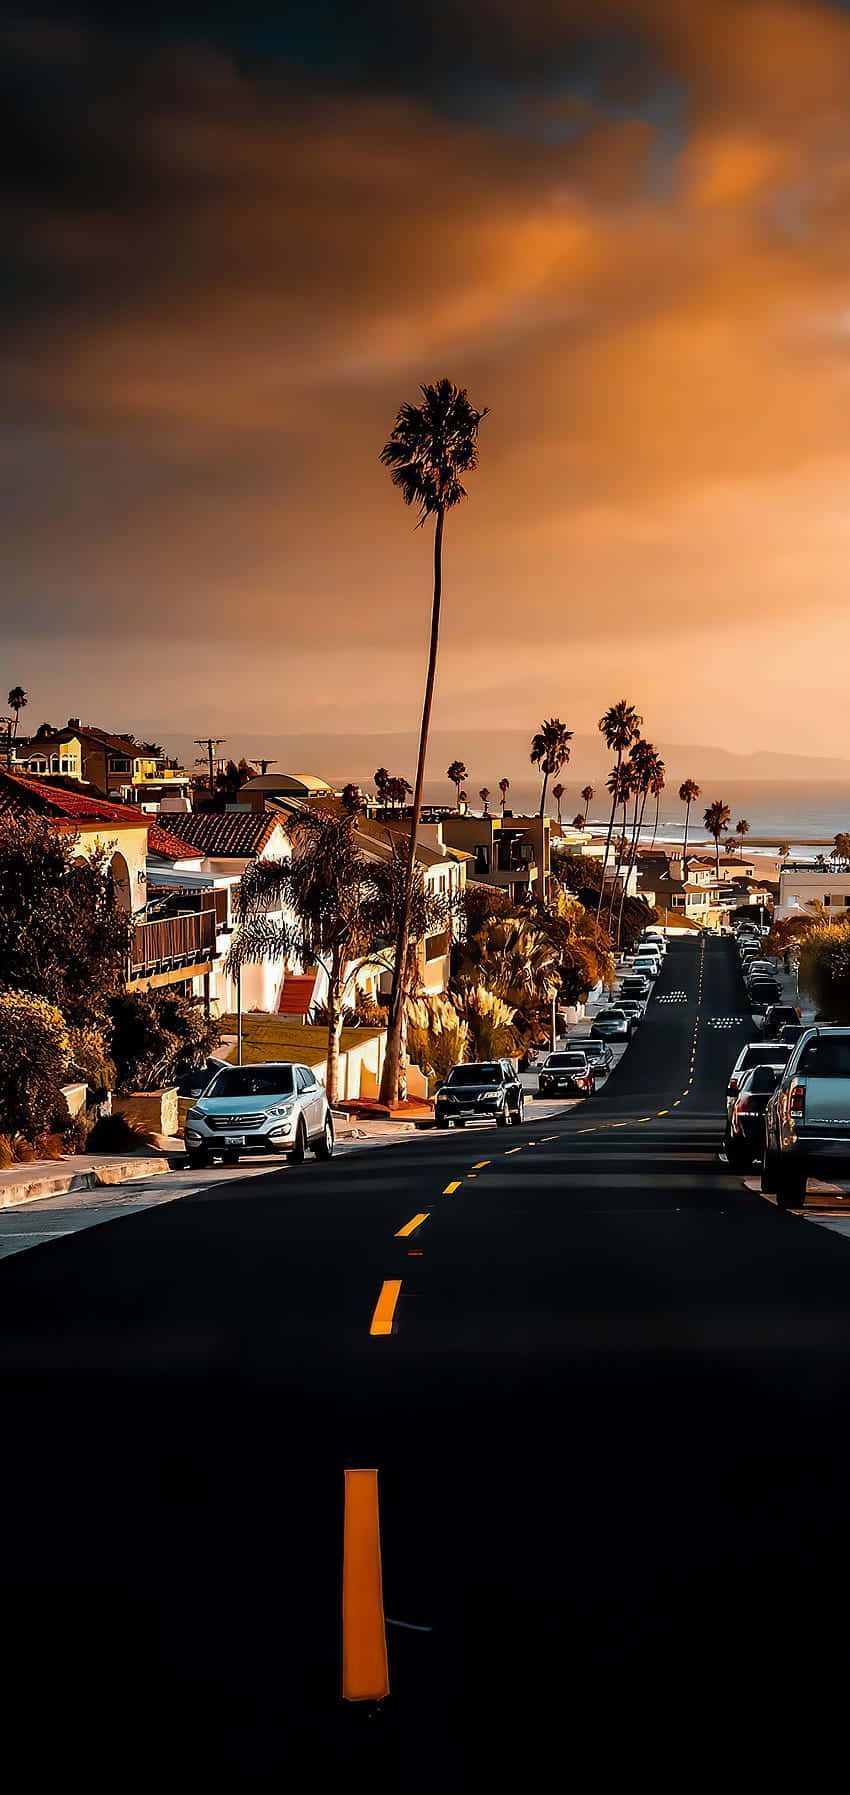 A city street with palm trees and a sunset in the background - California